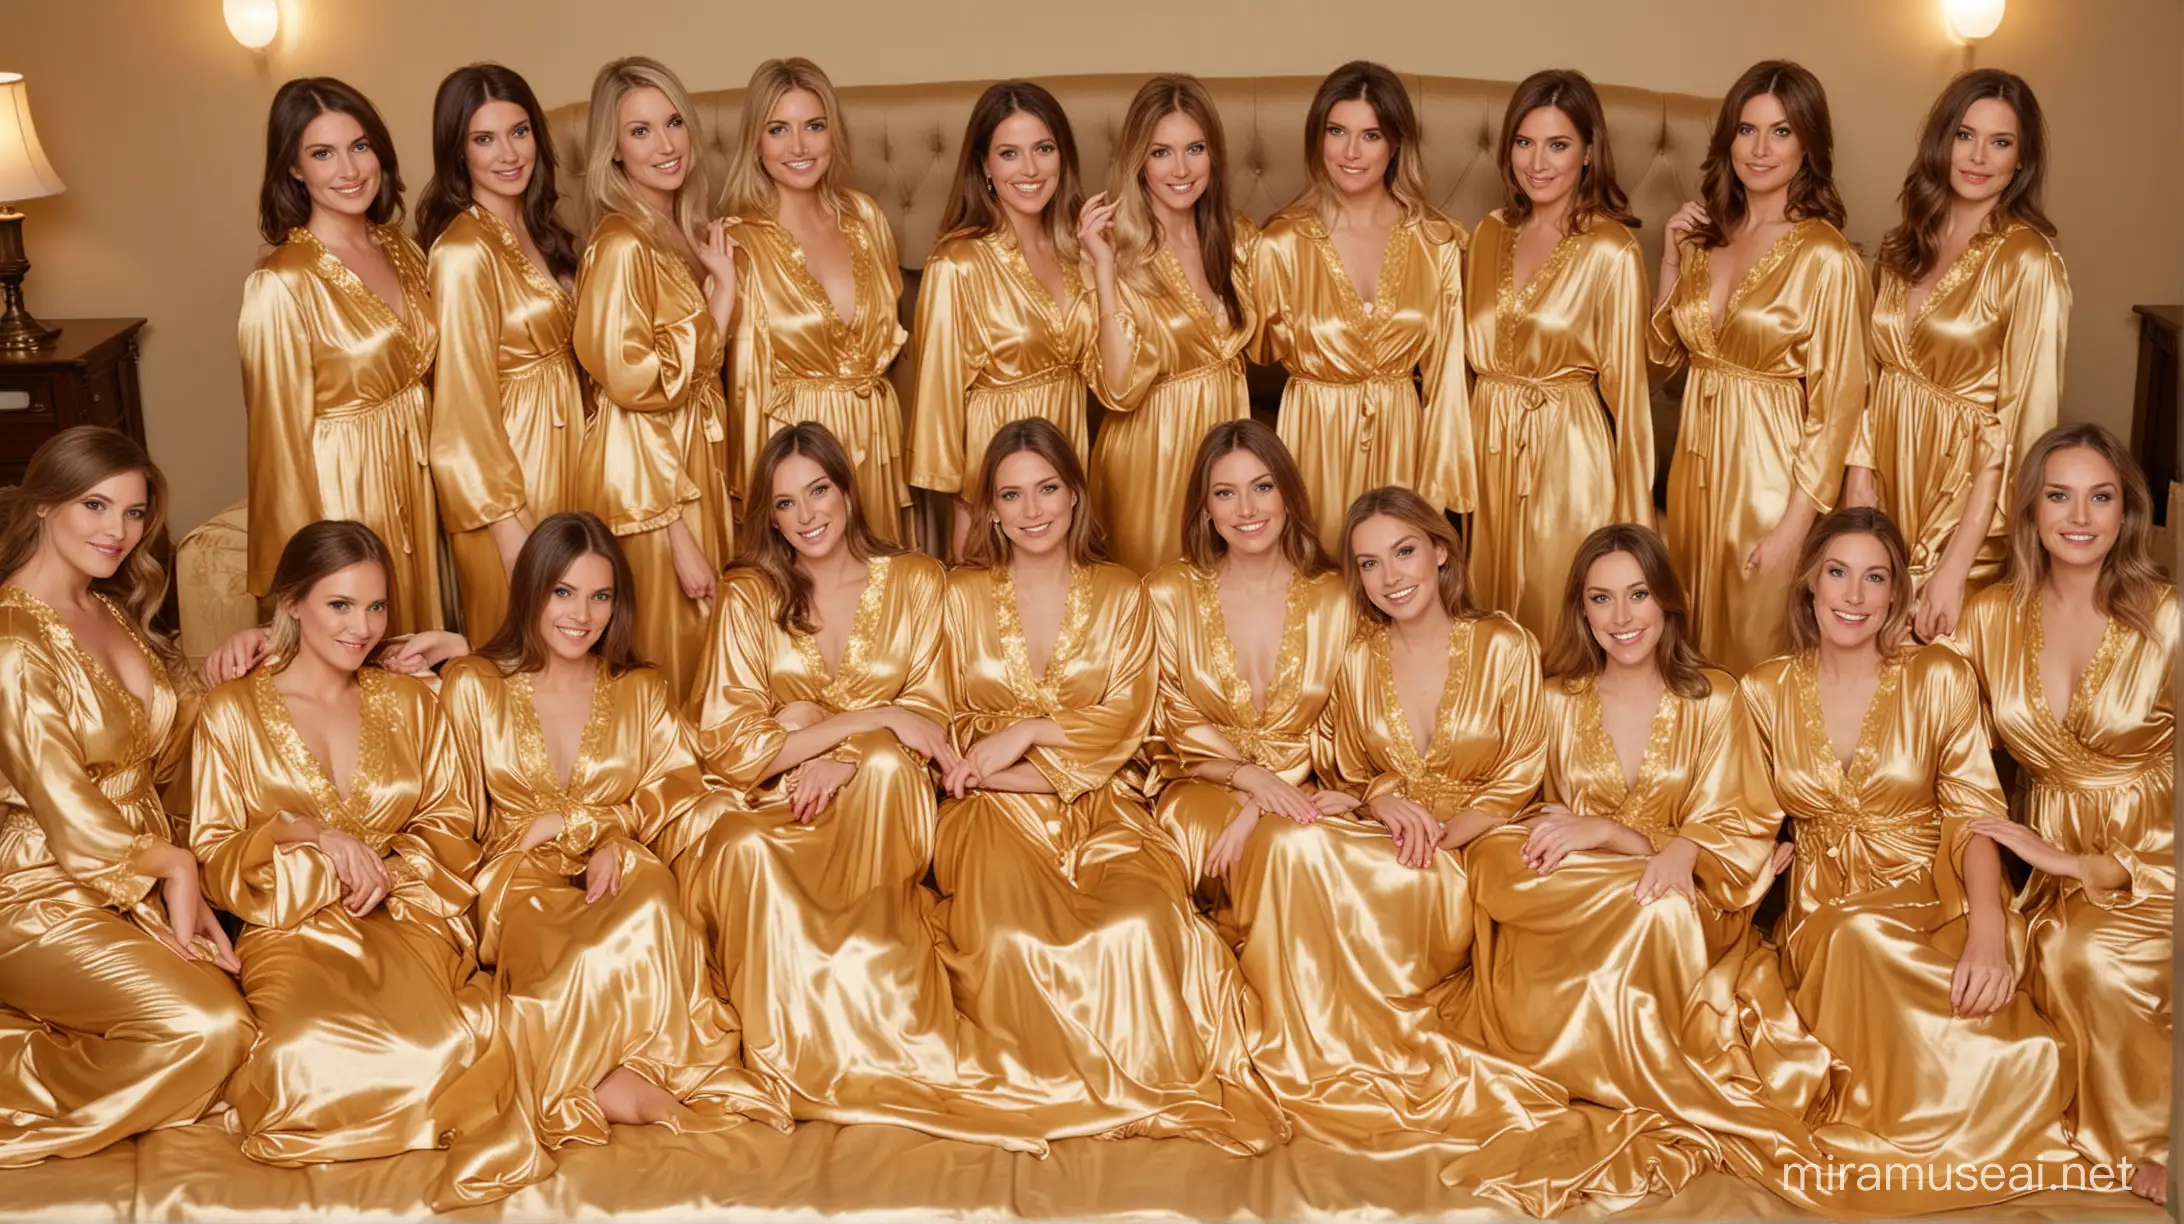 Elegant Women in Gold Satin Nightgowns on Luxurious Satin Beds